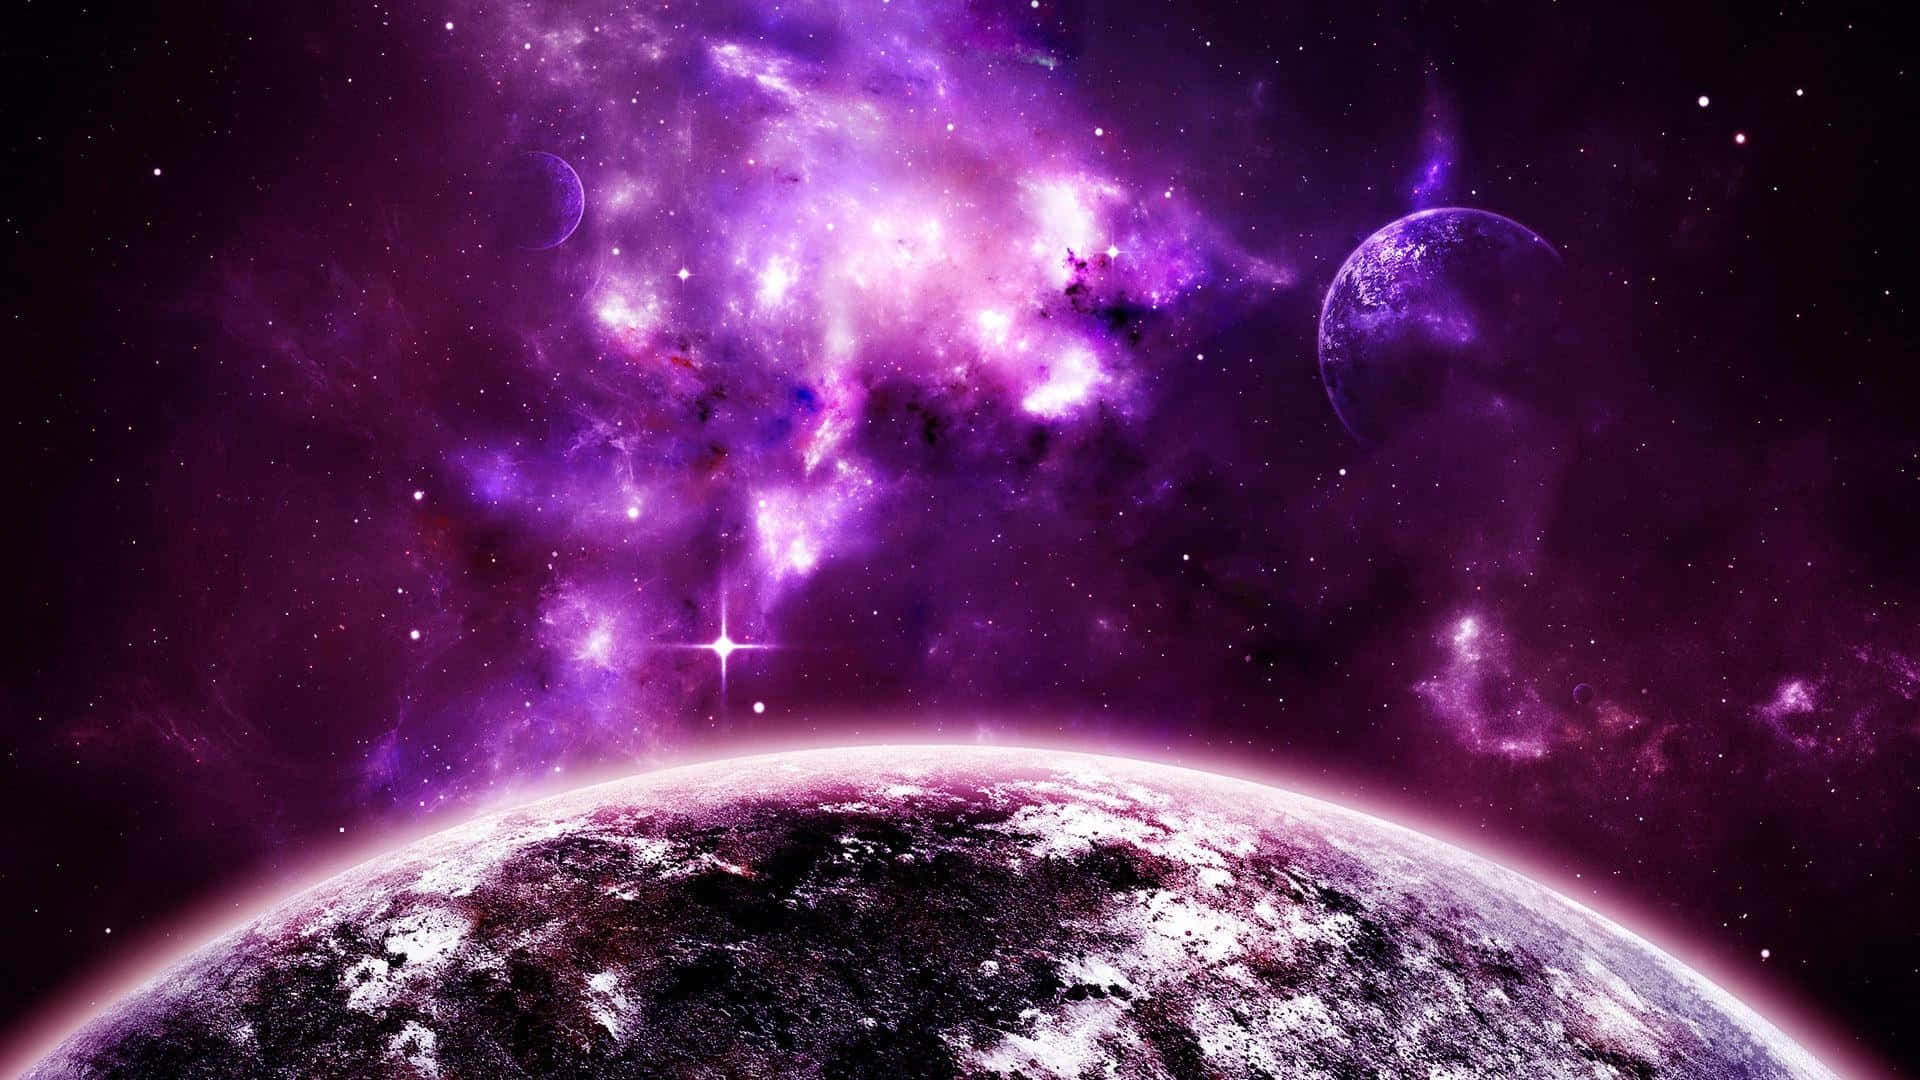 A Purple Planet In Space With Stars And Planets